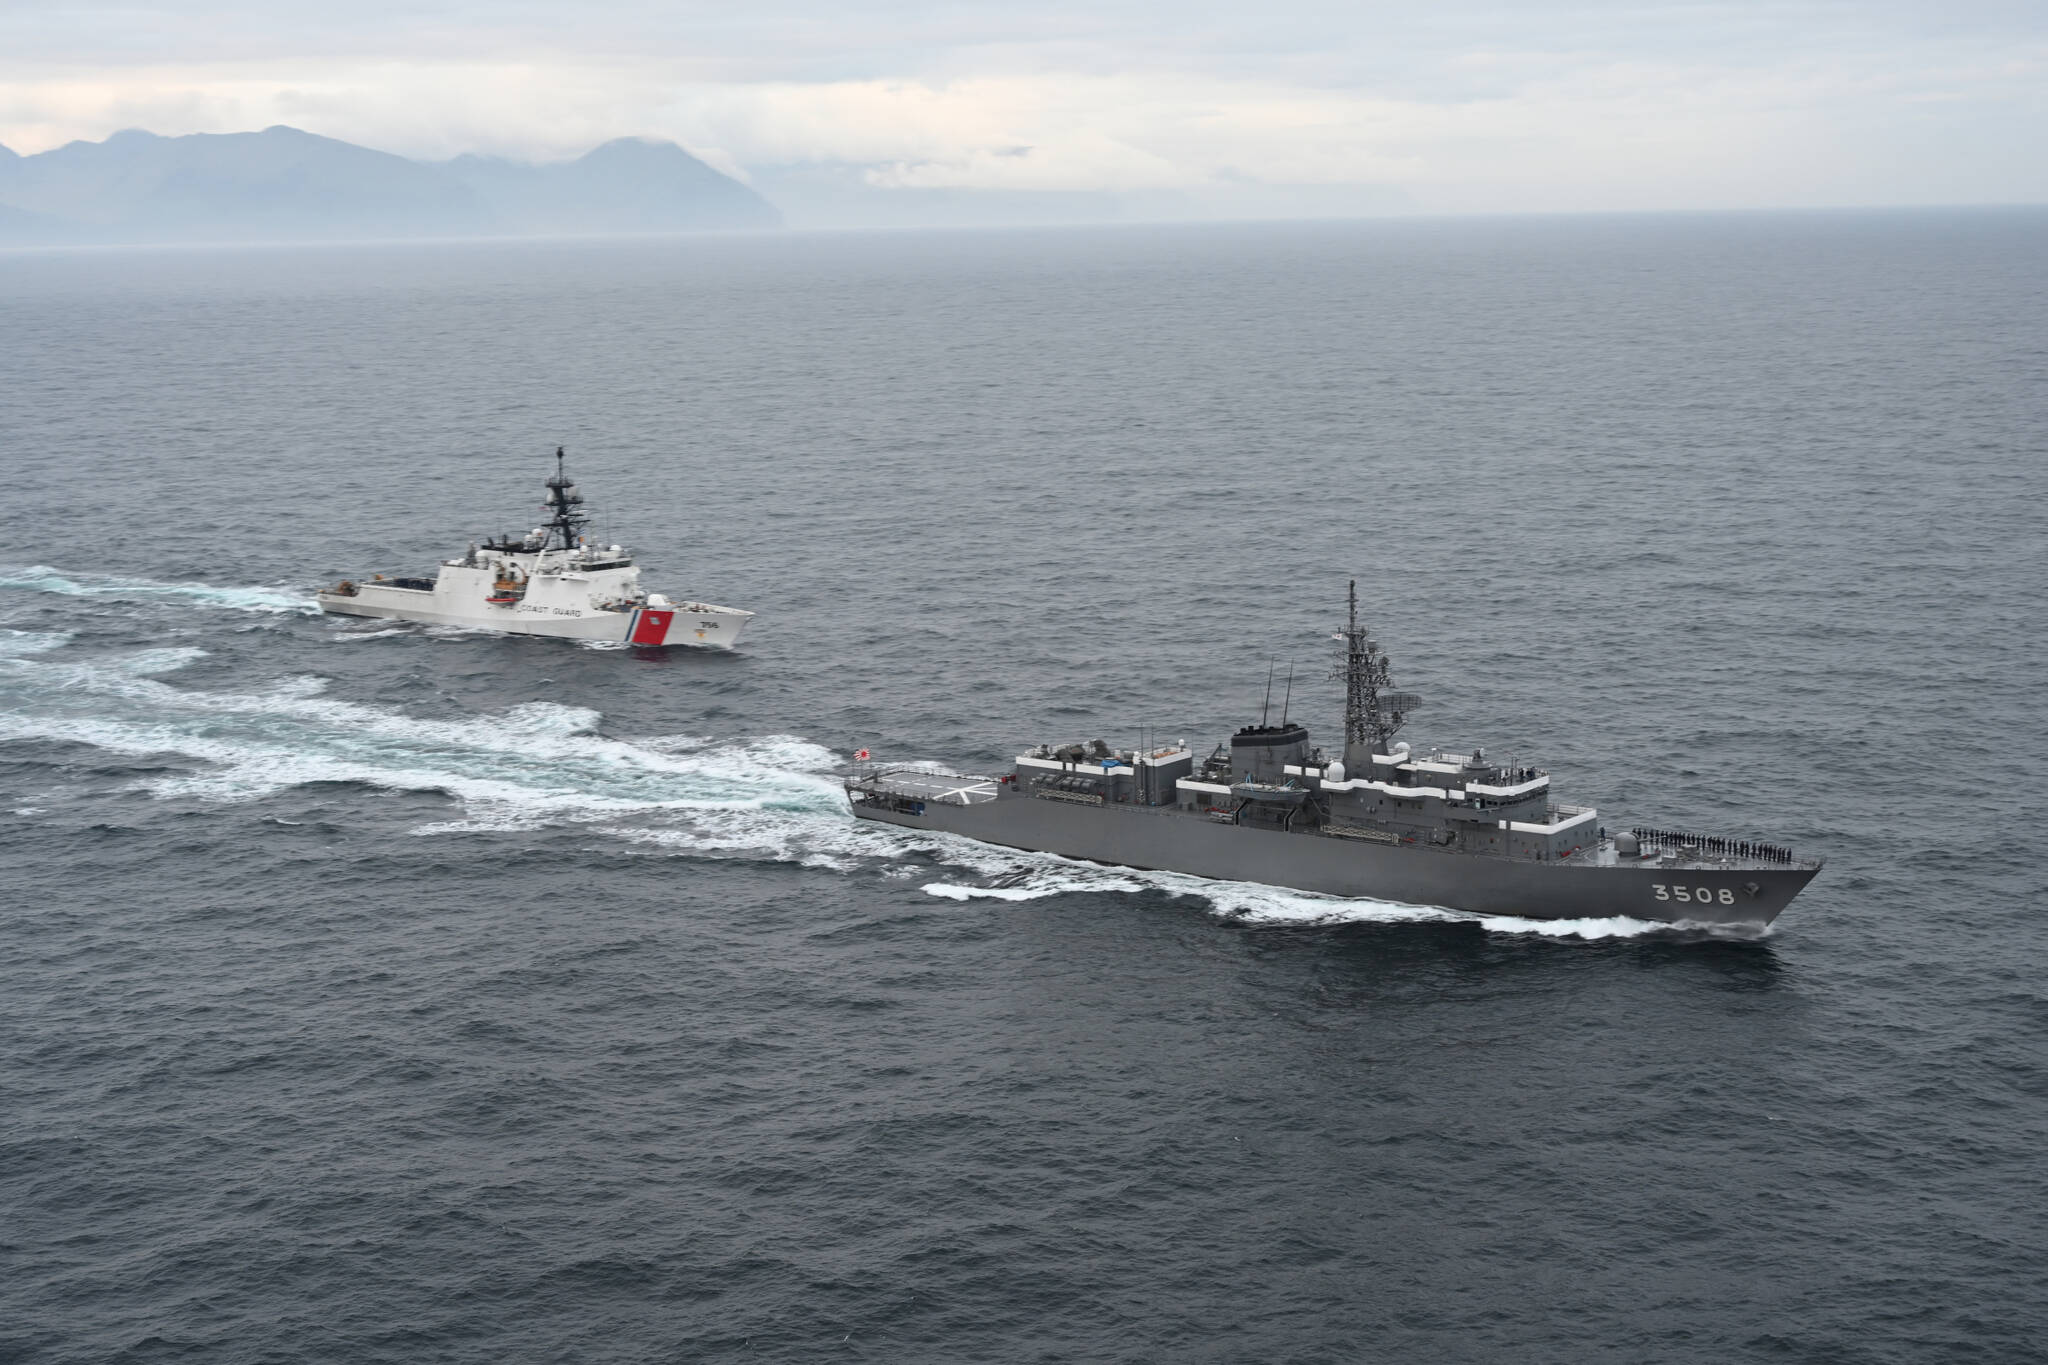 The U.S. Coast Guard Cutter Kimball and the Japanese Ship Kashima, a naval training vessel of the Japan Maritime Self-Defense Force, transit together during a maritime exercise near Dutch Harbor on Sept. 20, 2021. (Courtesy photo / USCG)